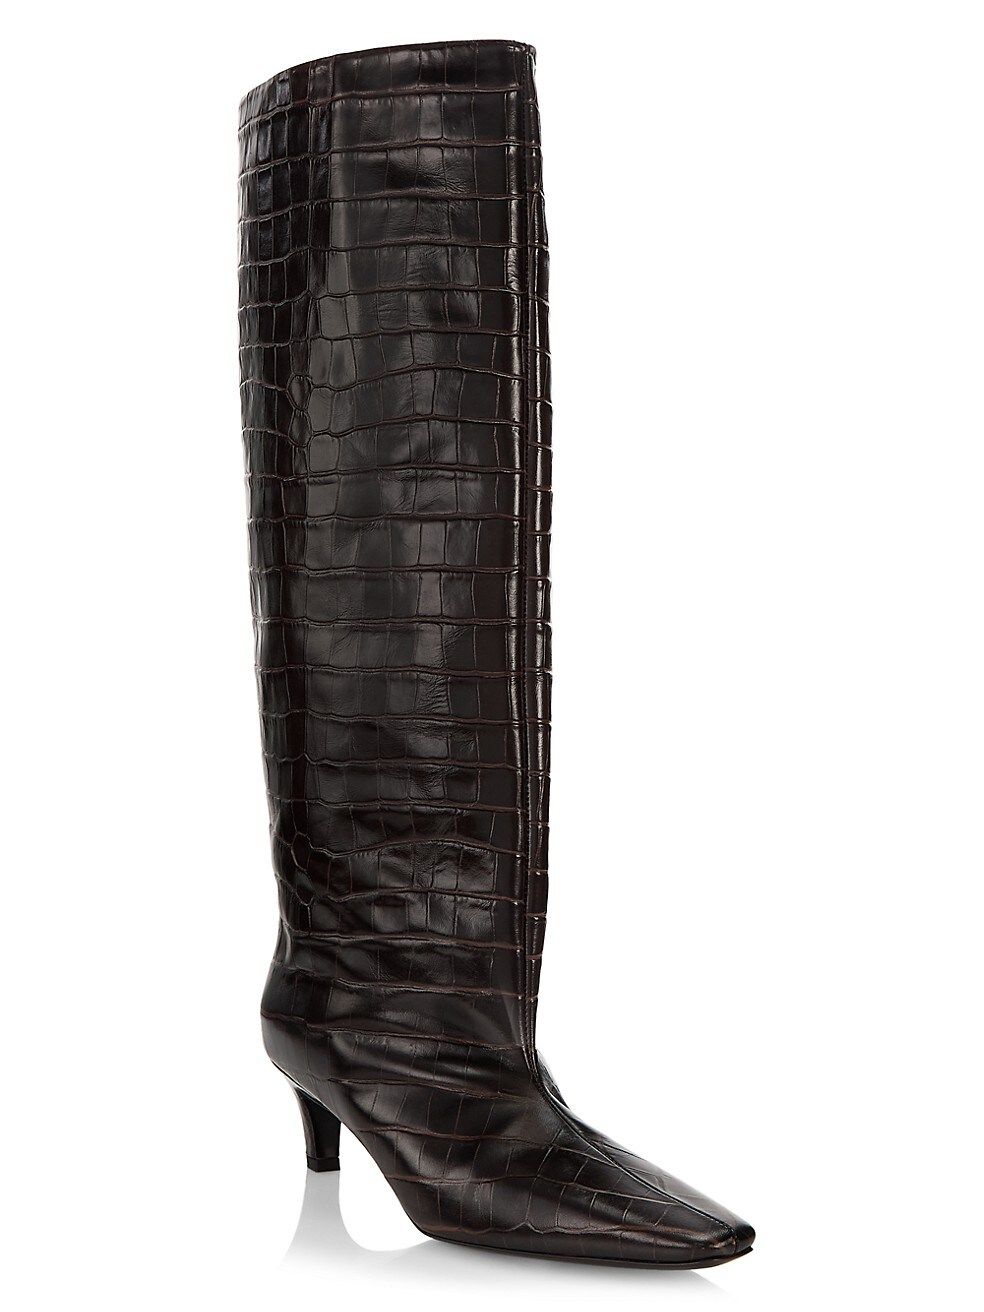 Totême The Wide Shaft Croc-Embossed Leather Boots | Saks Fifth Avenue